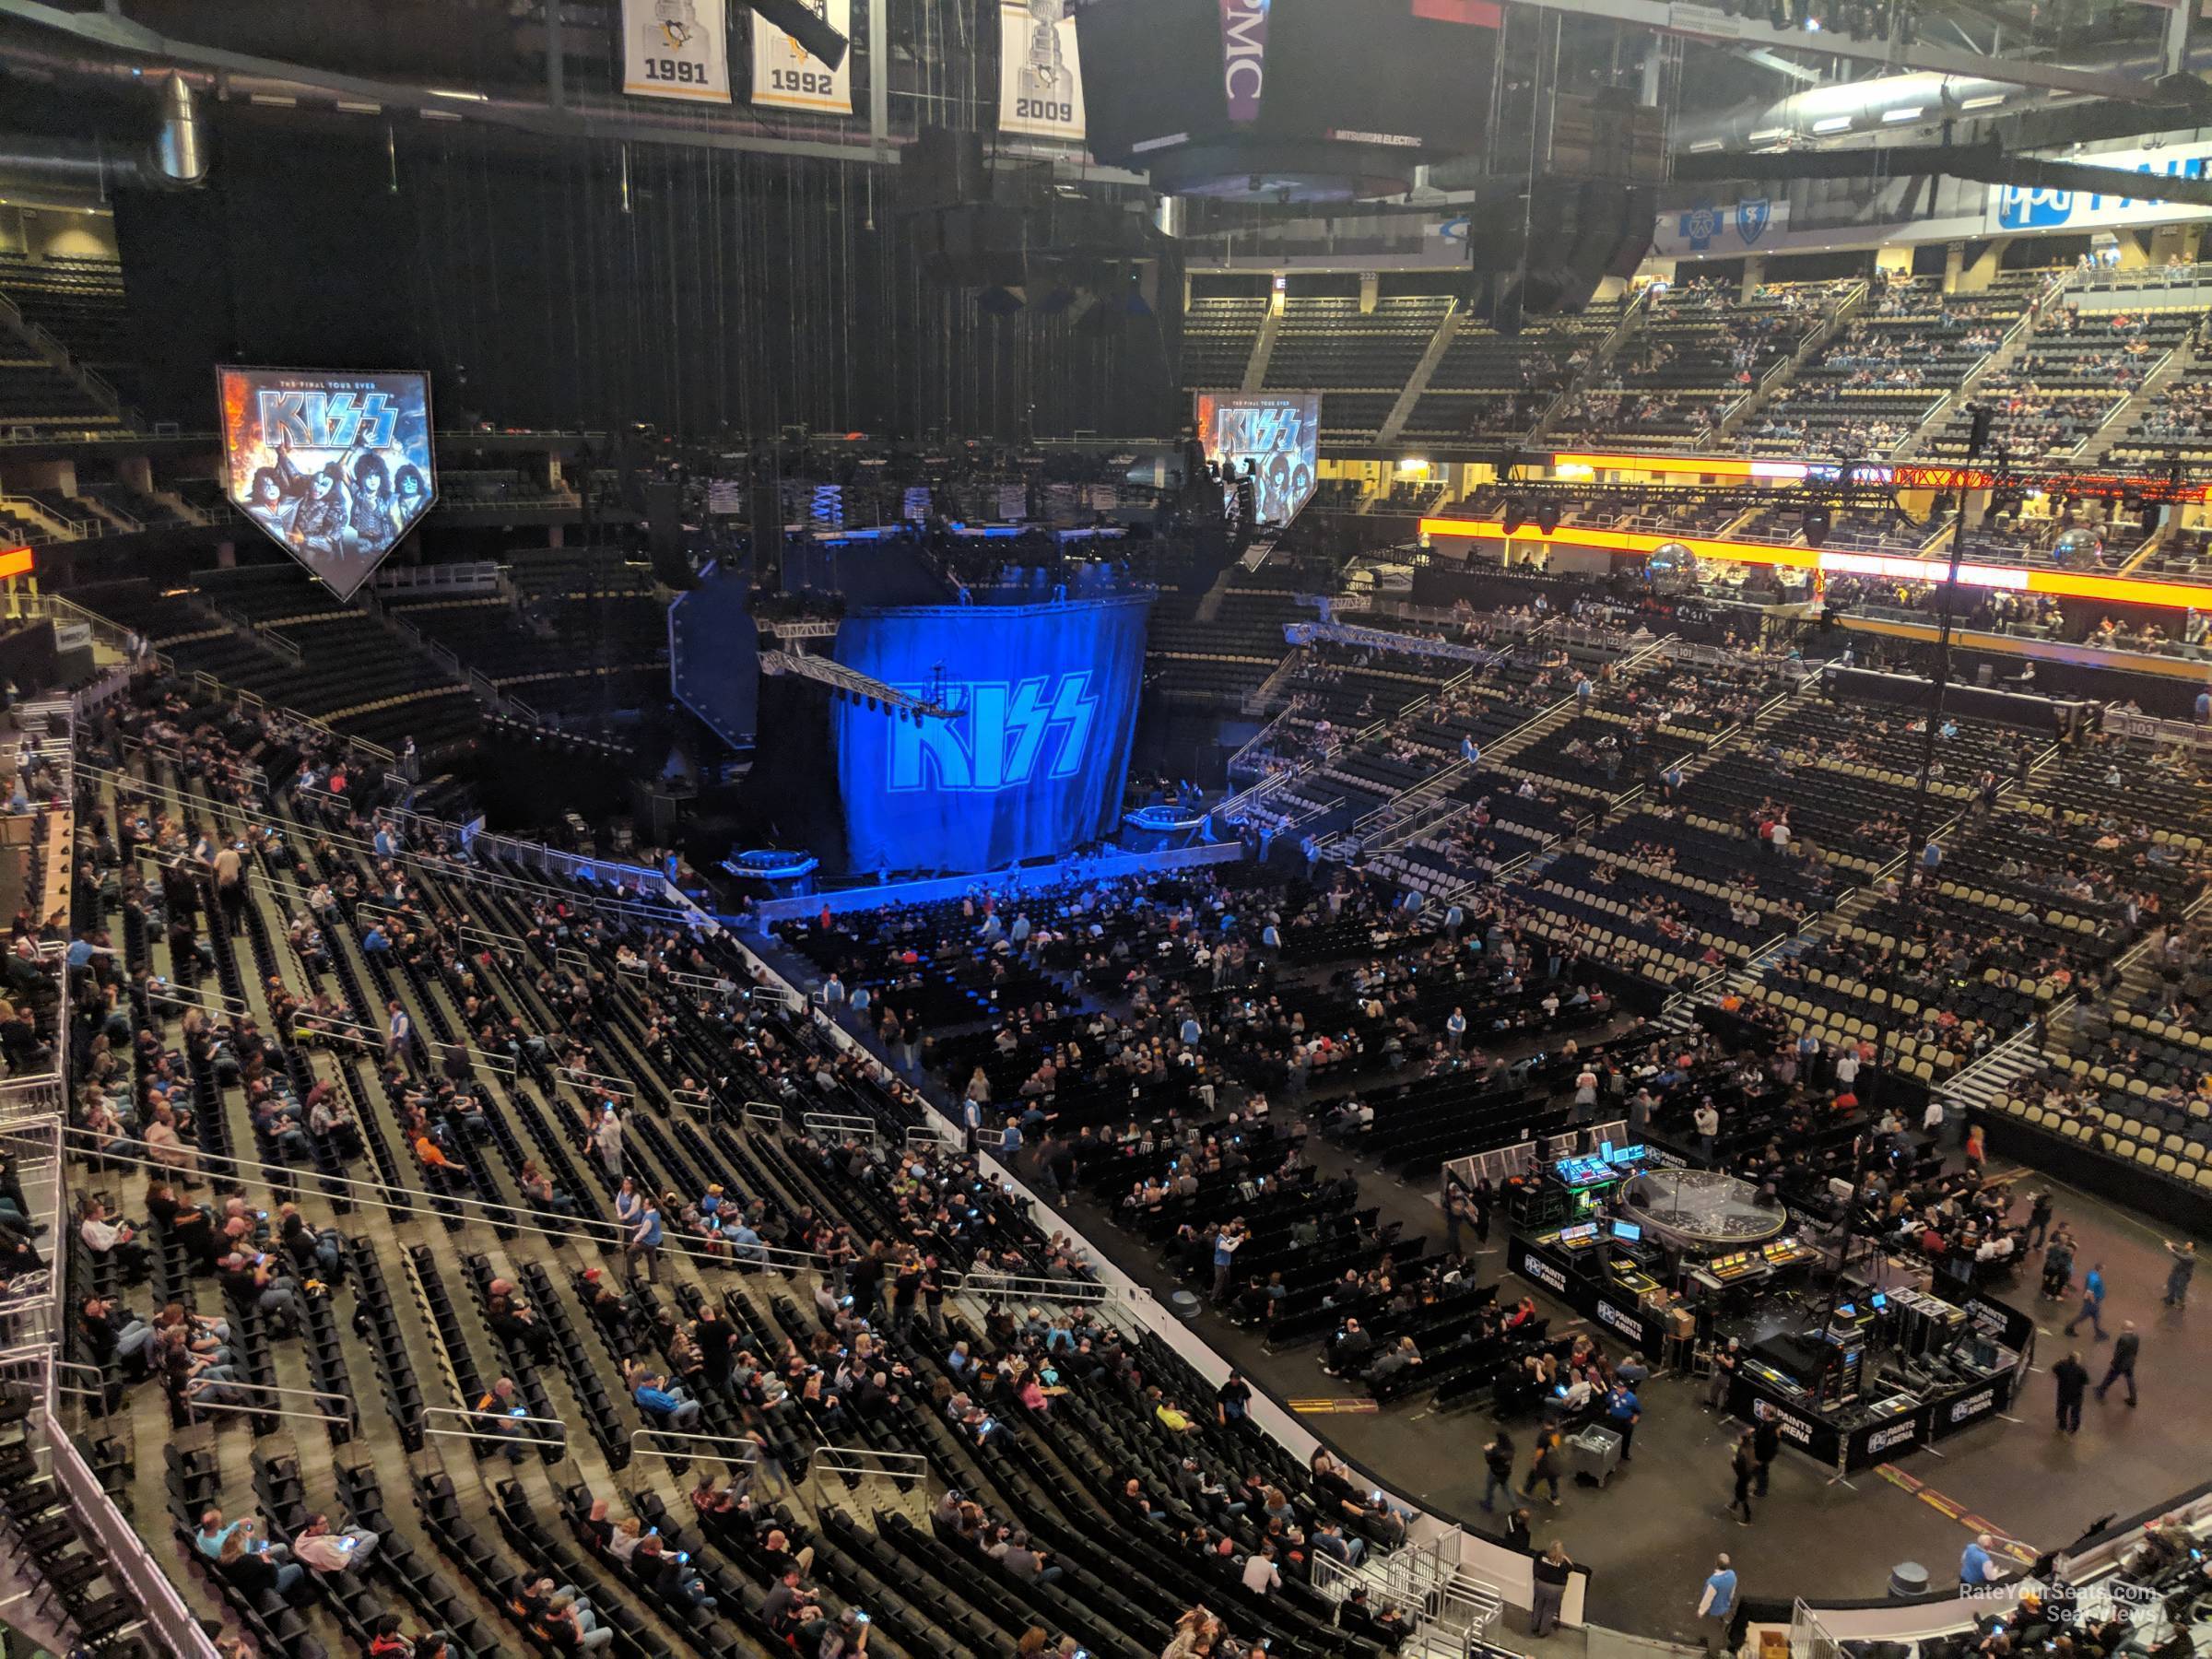 Section 203 at PPG Paints Arena 